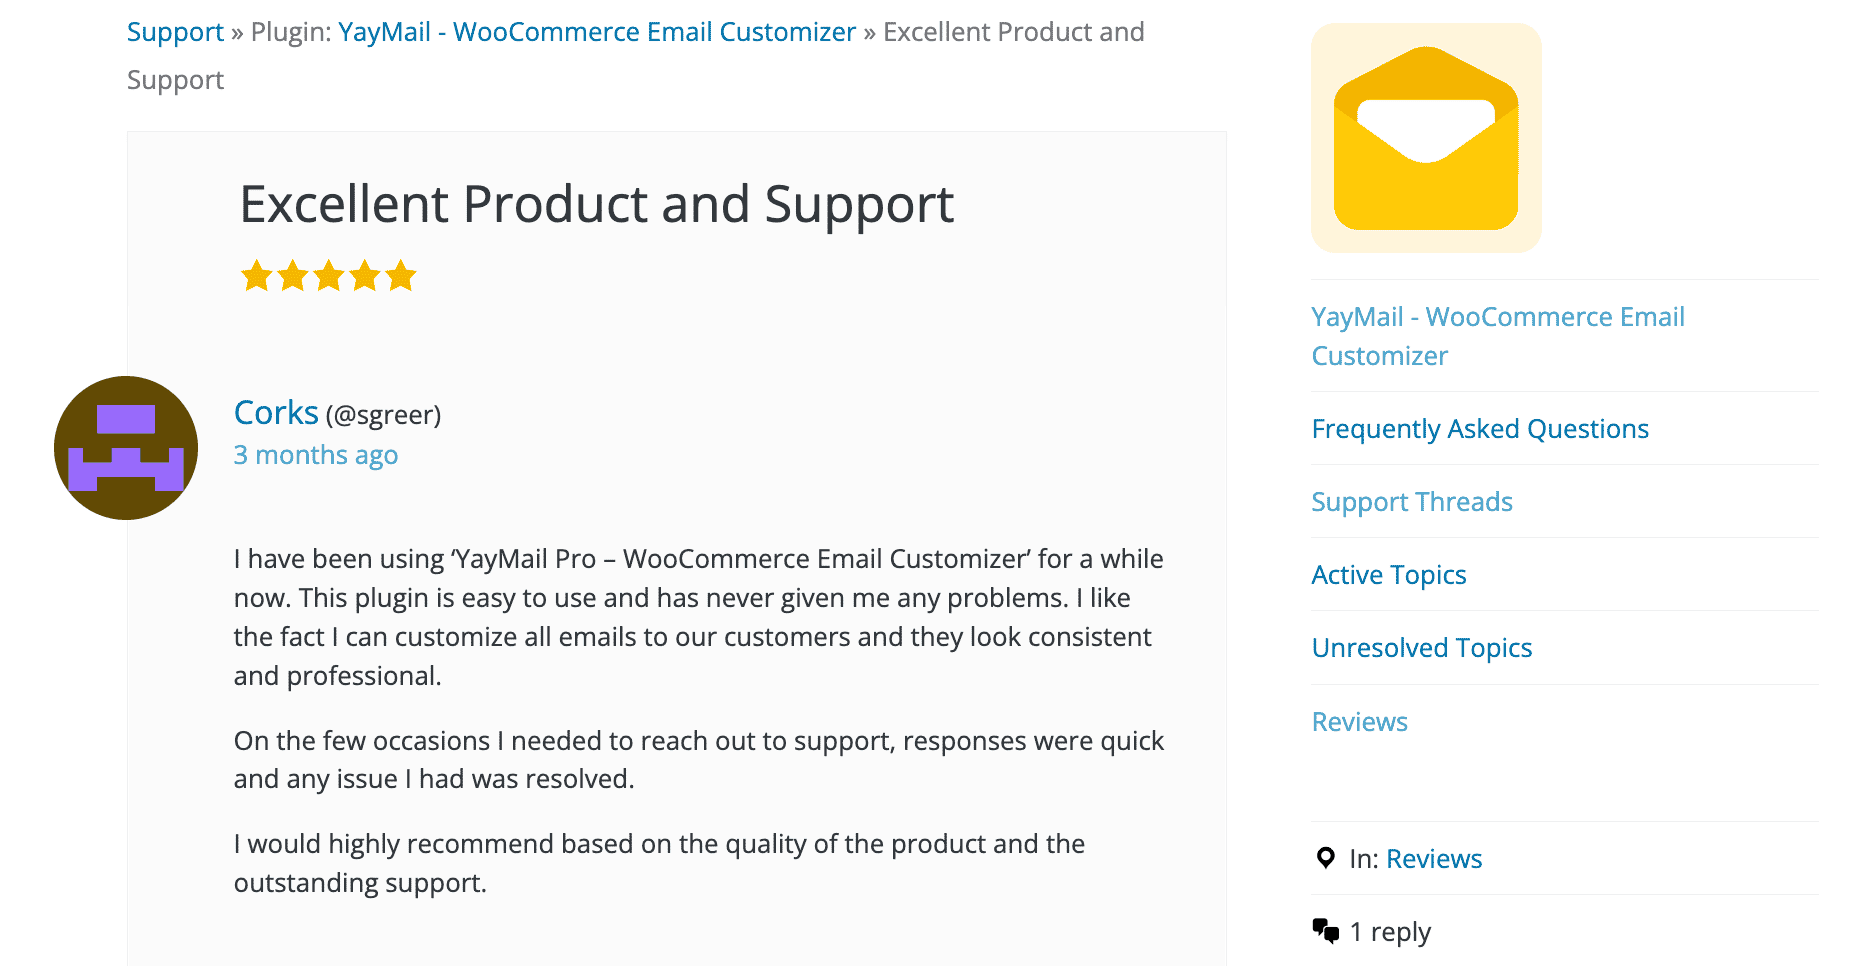 YayMail provides excellent WooCommerce email plugin and support